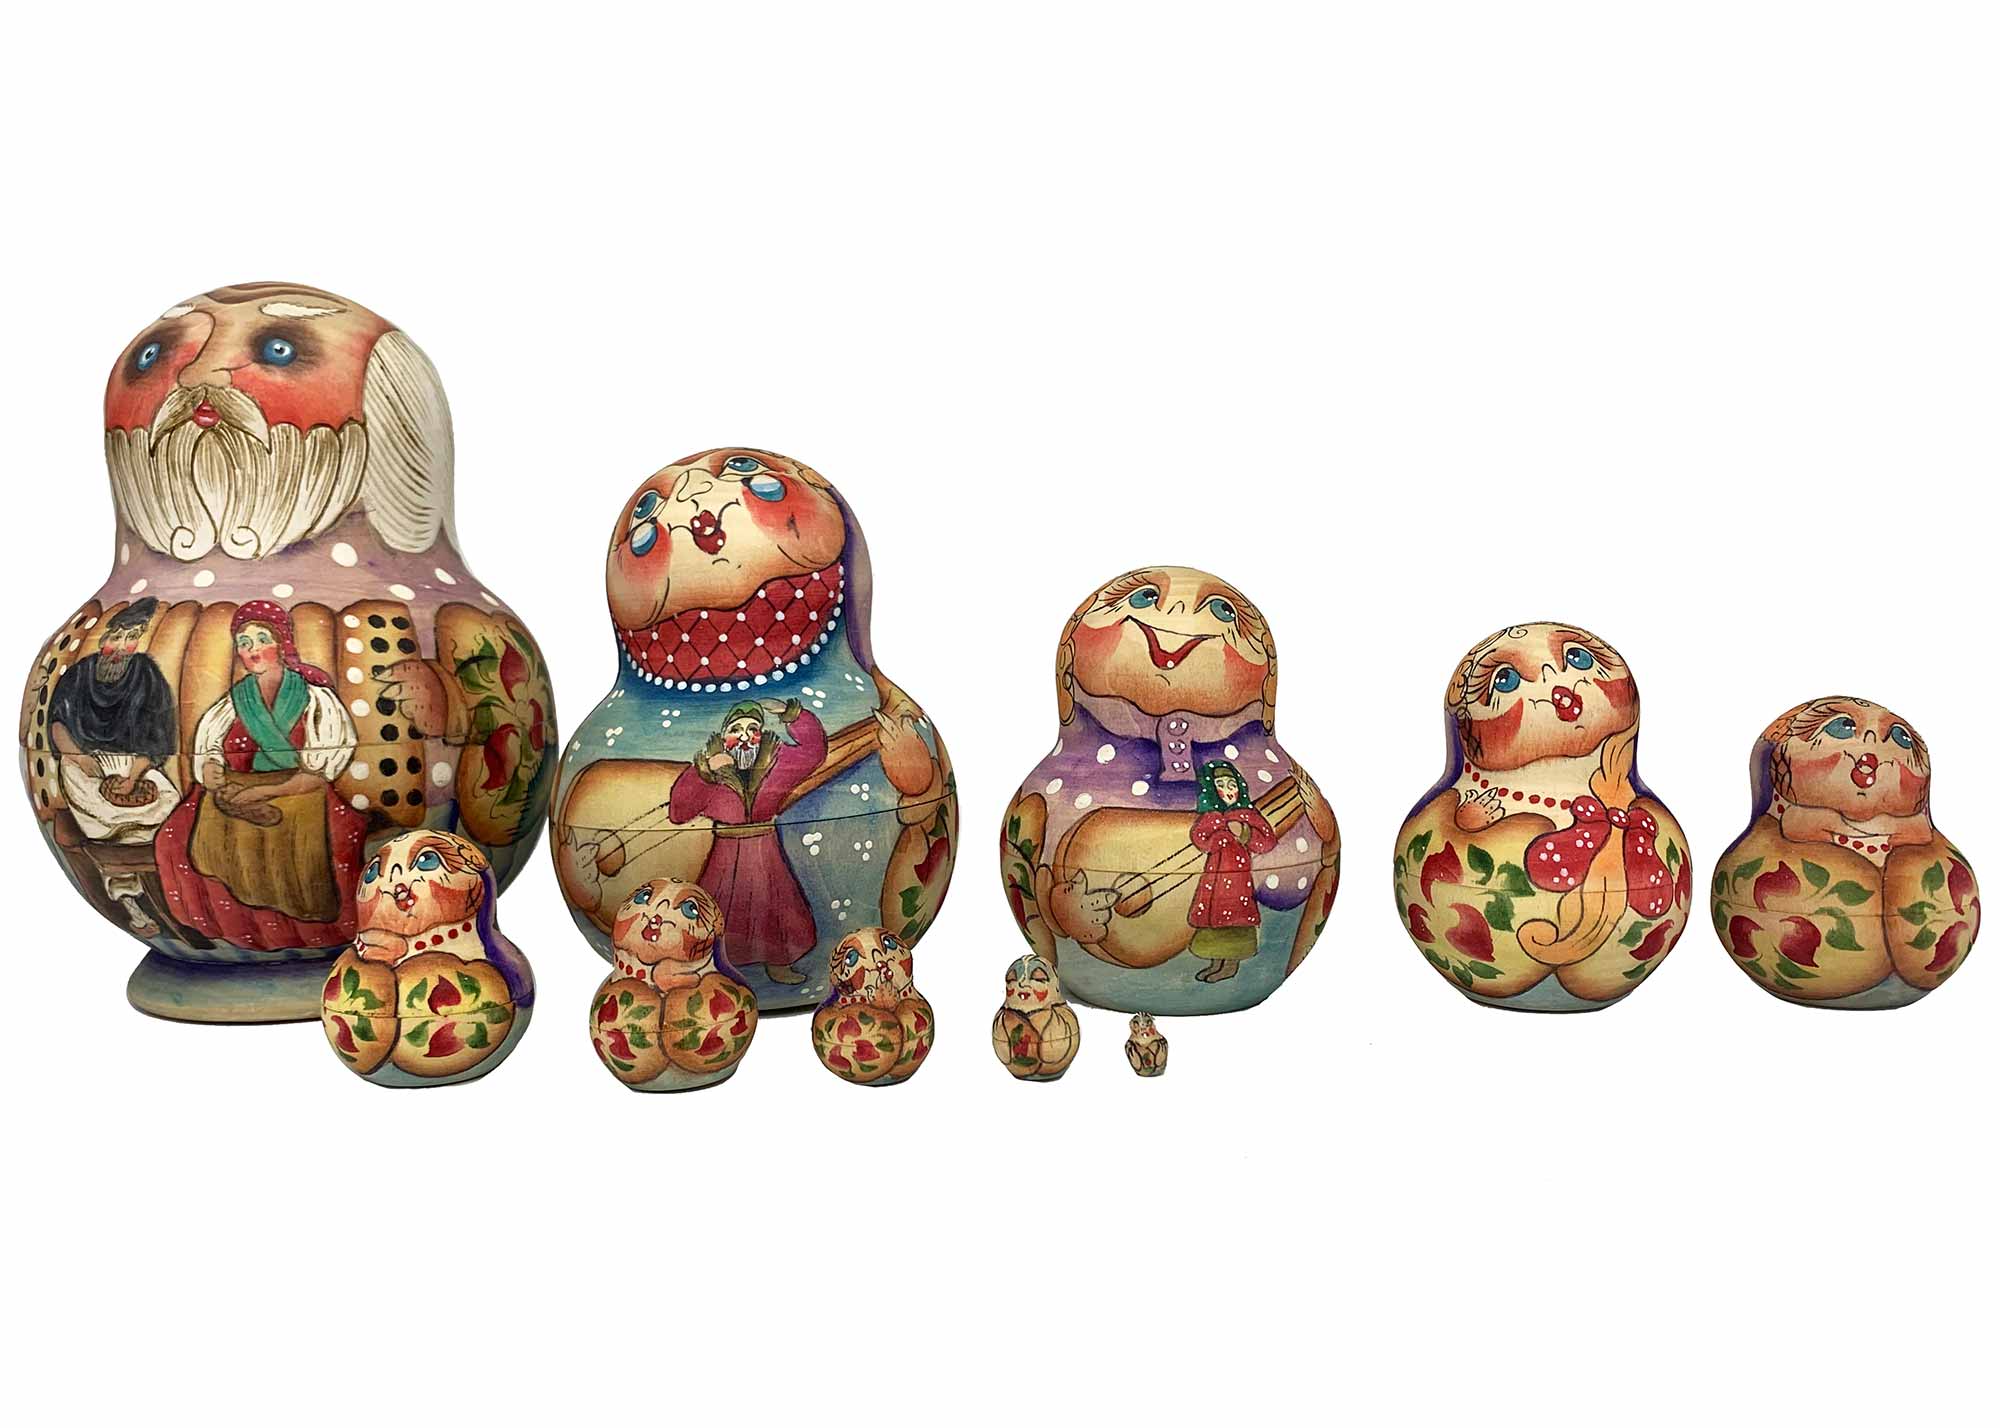 Buy Imperfect Vintage "In the Home" Peasant Man Nesting Doll 10pc./7" at GoldenCockerel.com